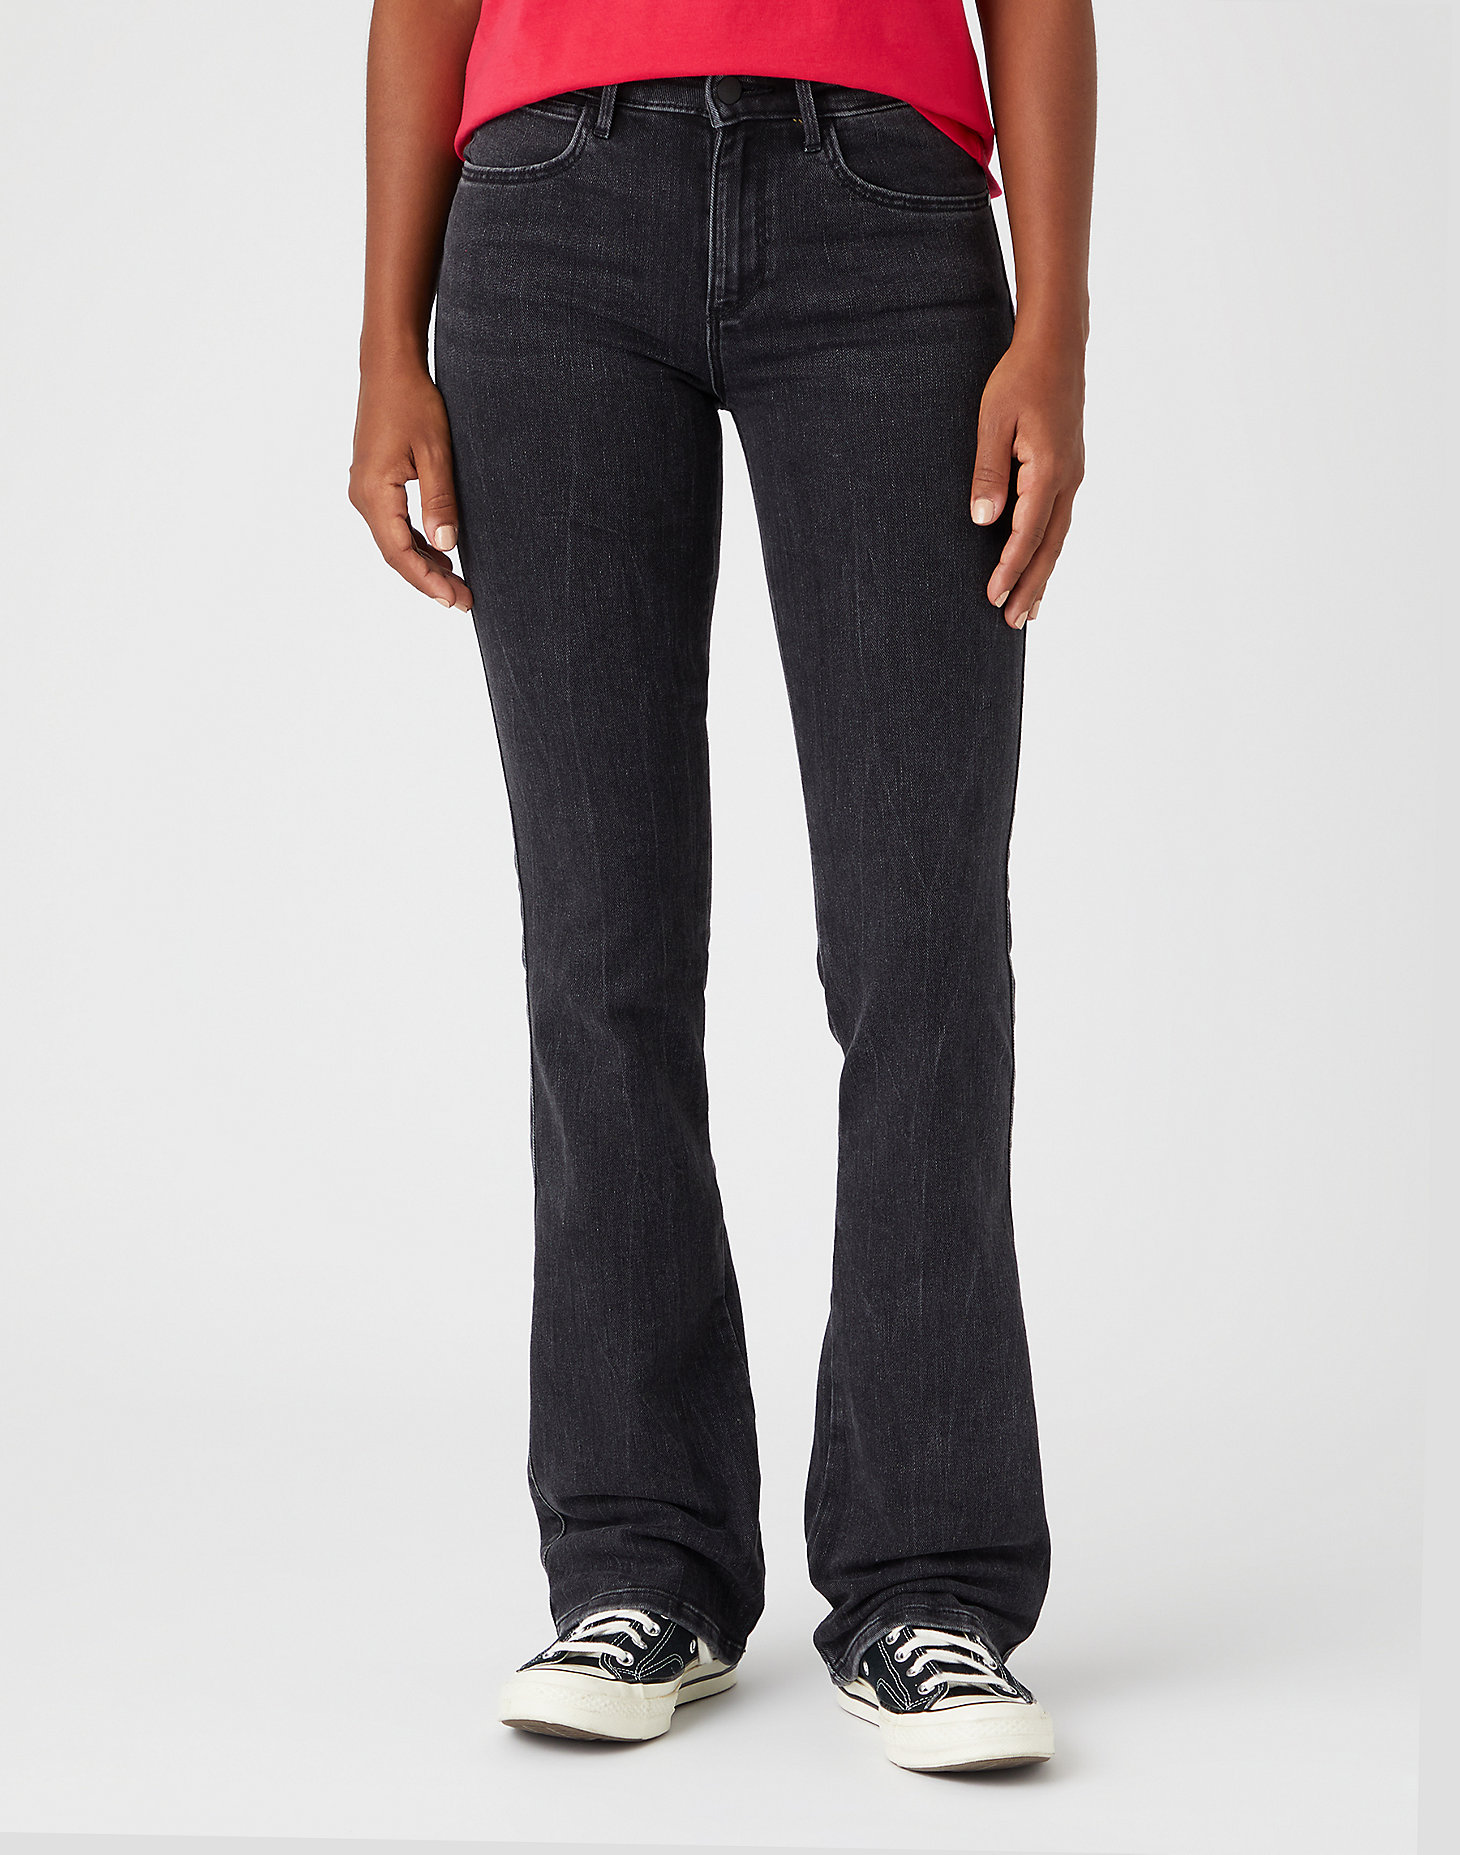 Bootcut Jeans in Soft Eclipse alternative view 1